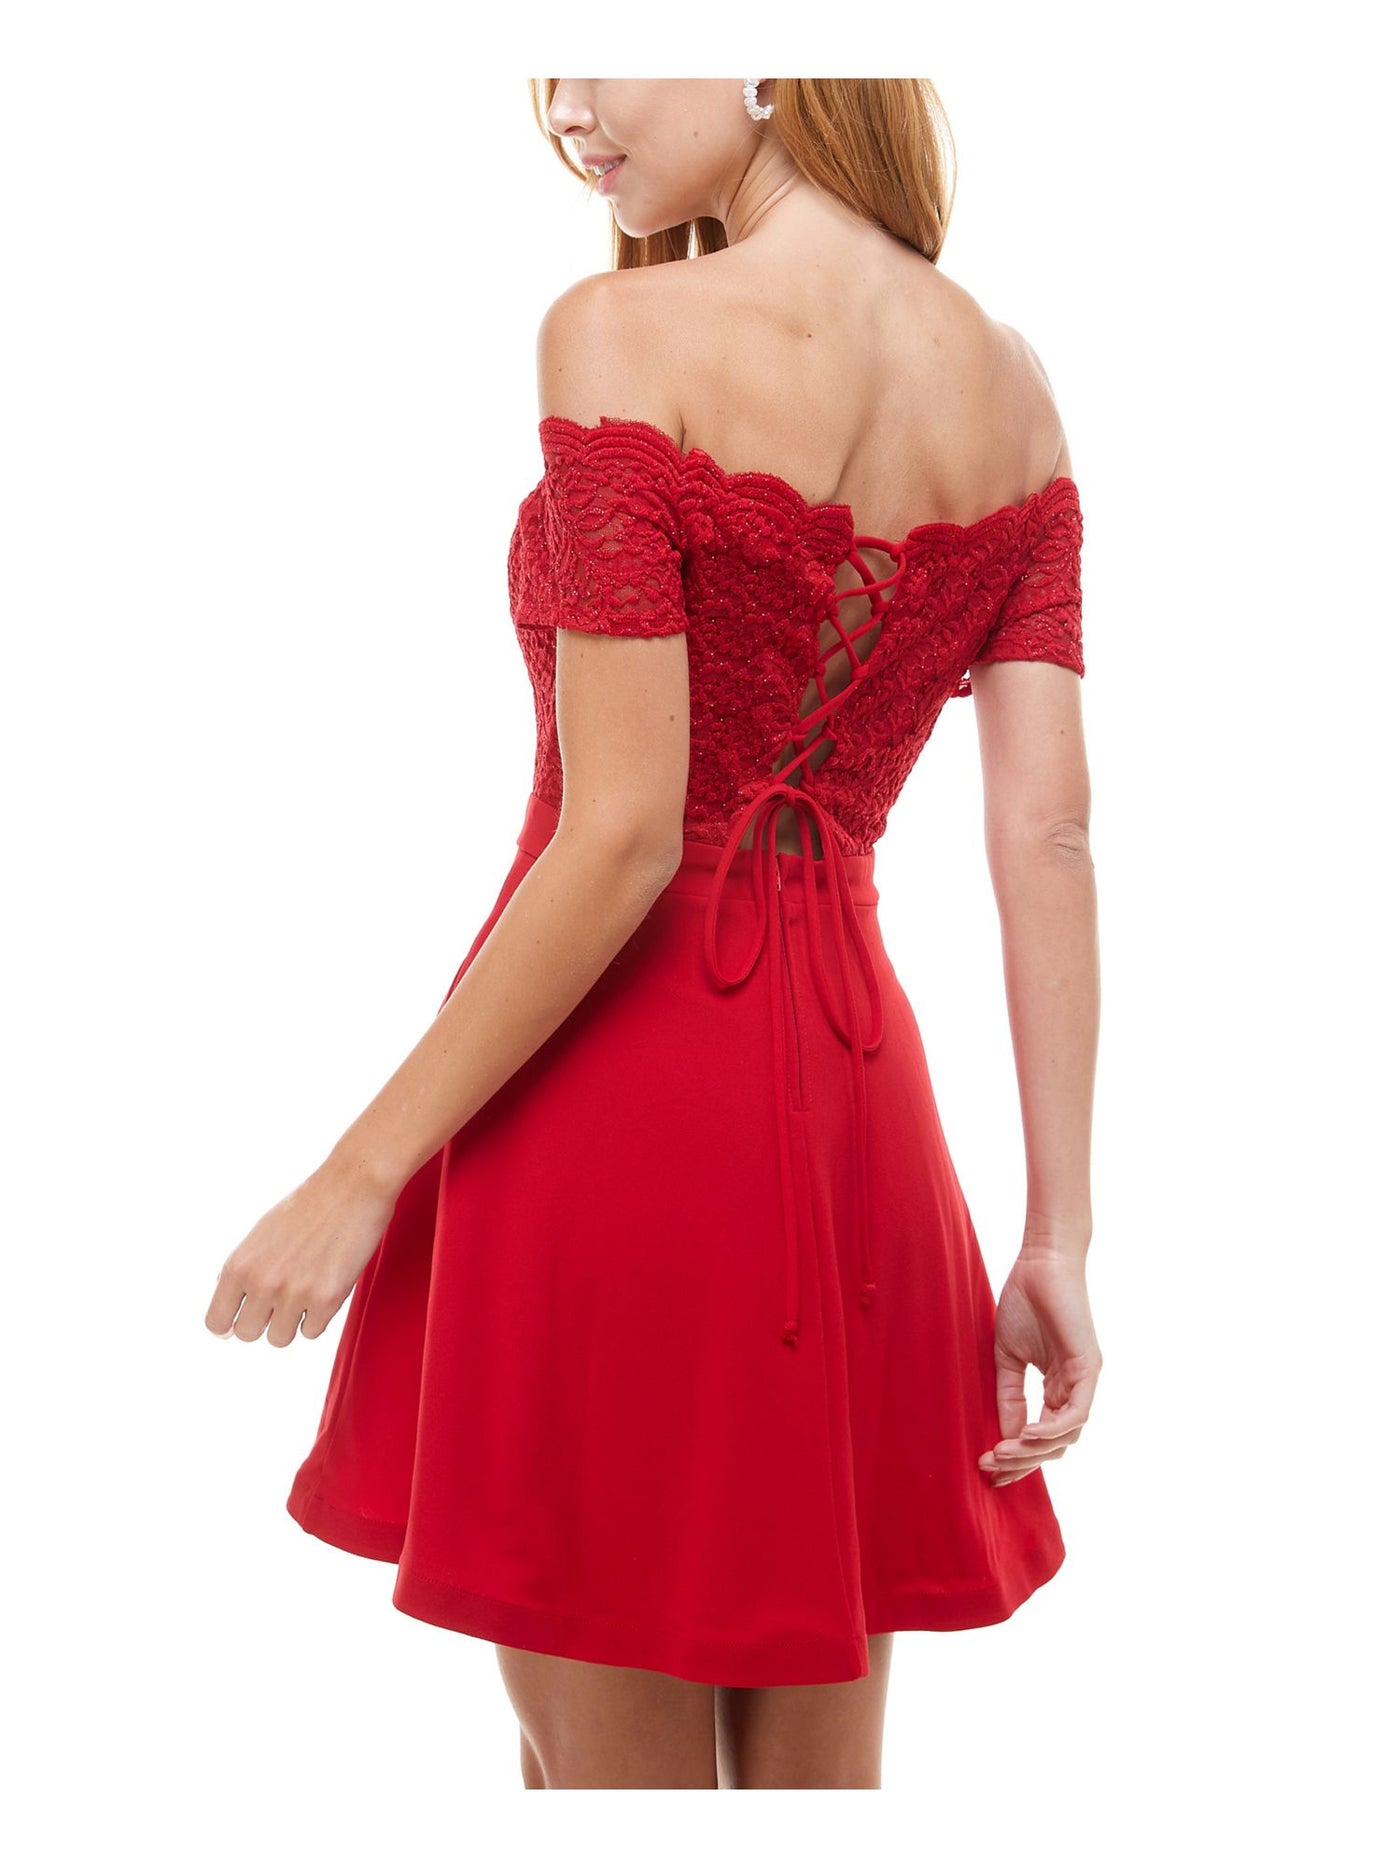 CITY STUDIO Womens Red Glitter Lace Scalloped Lace-up Short Sleeve Off Shoulder Short Party Fit + Flare Dress Juniors 3